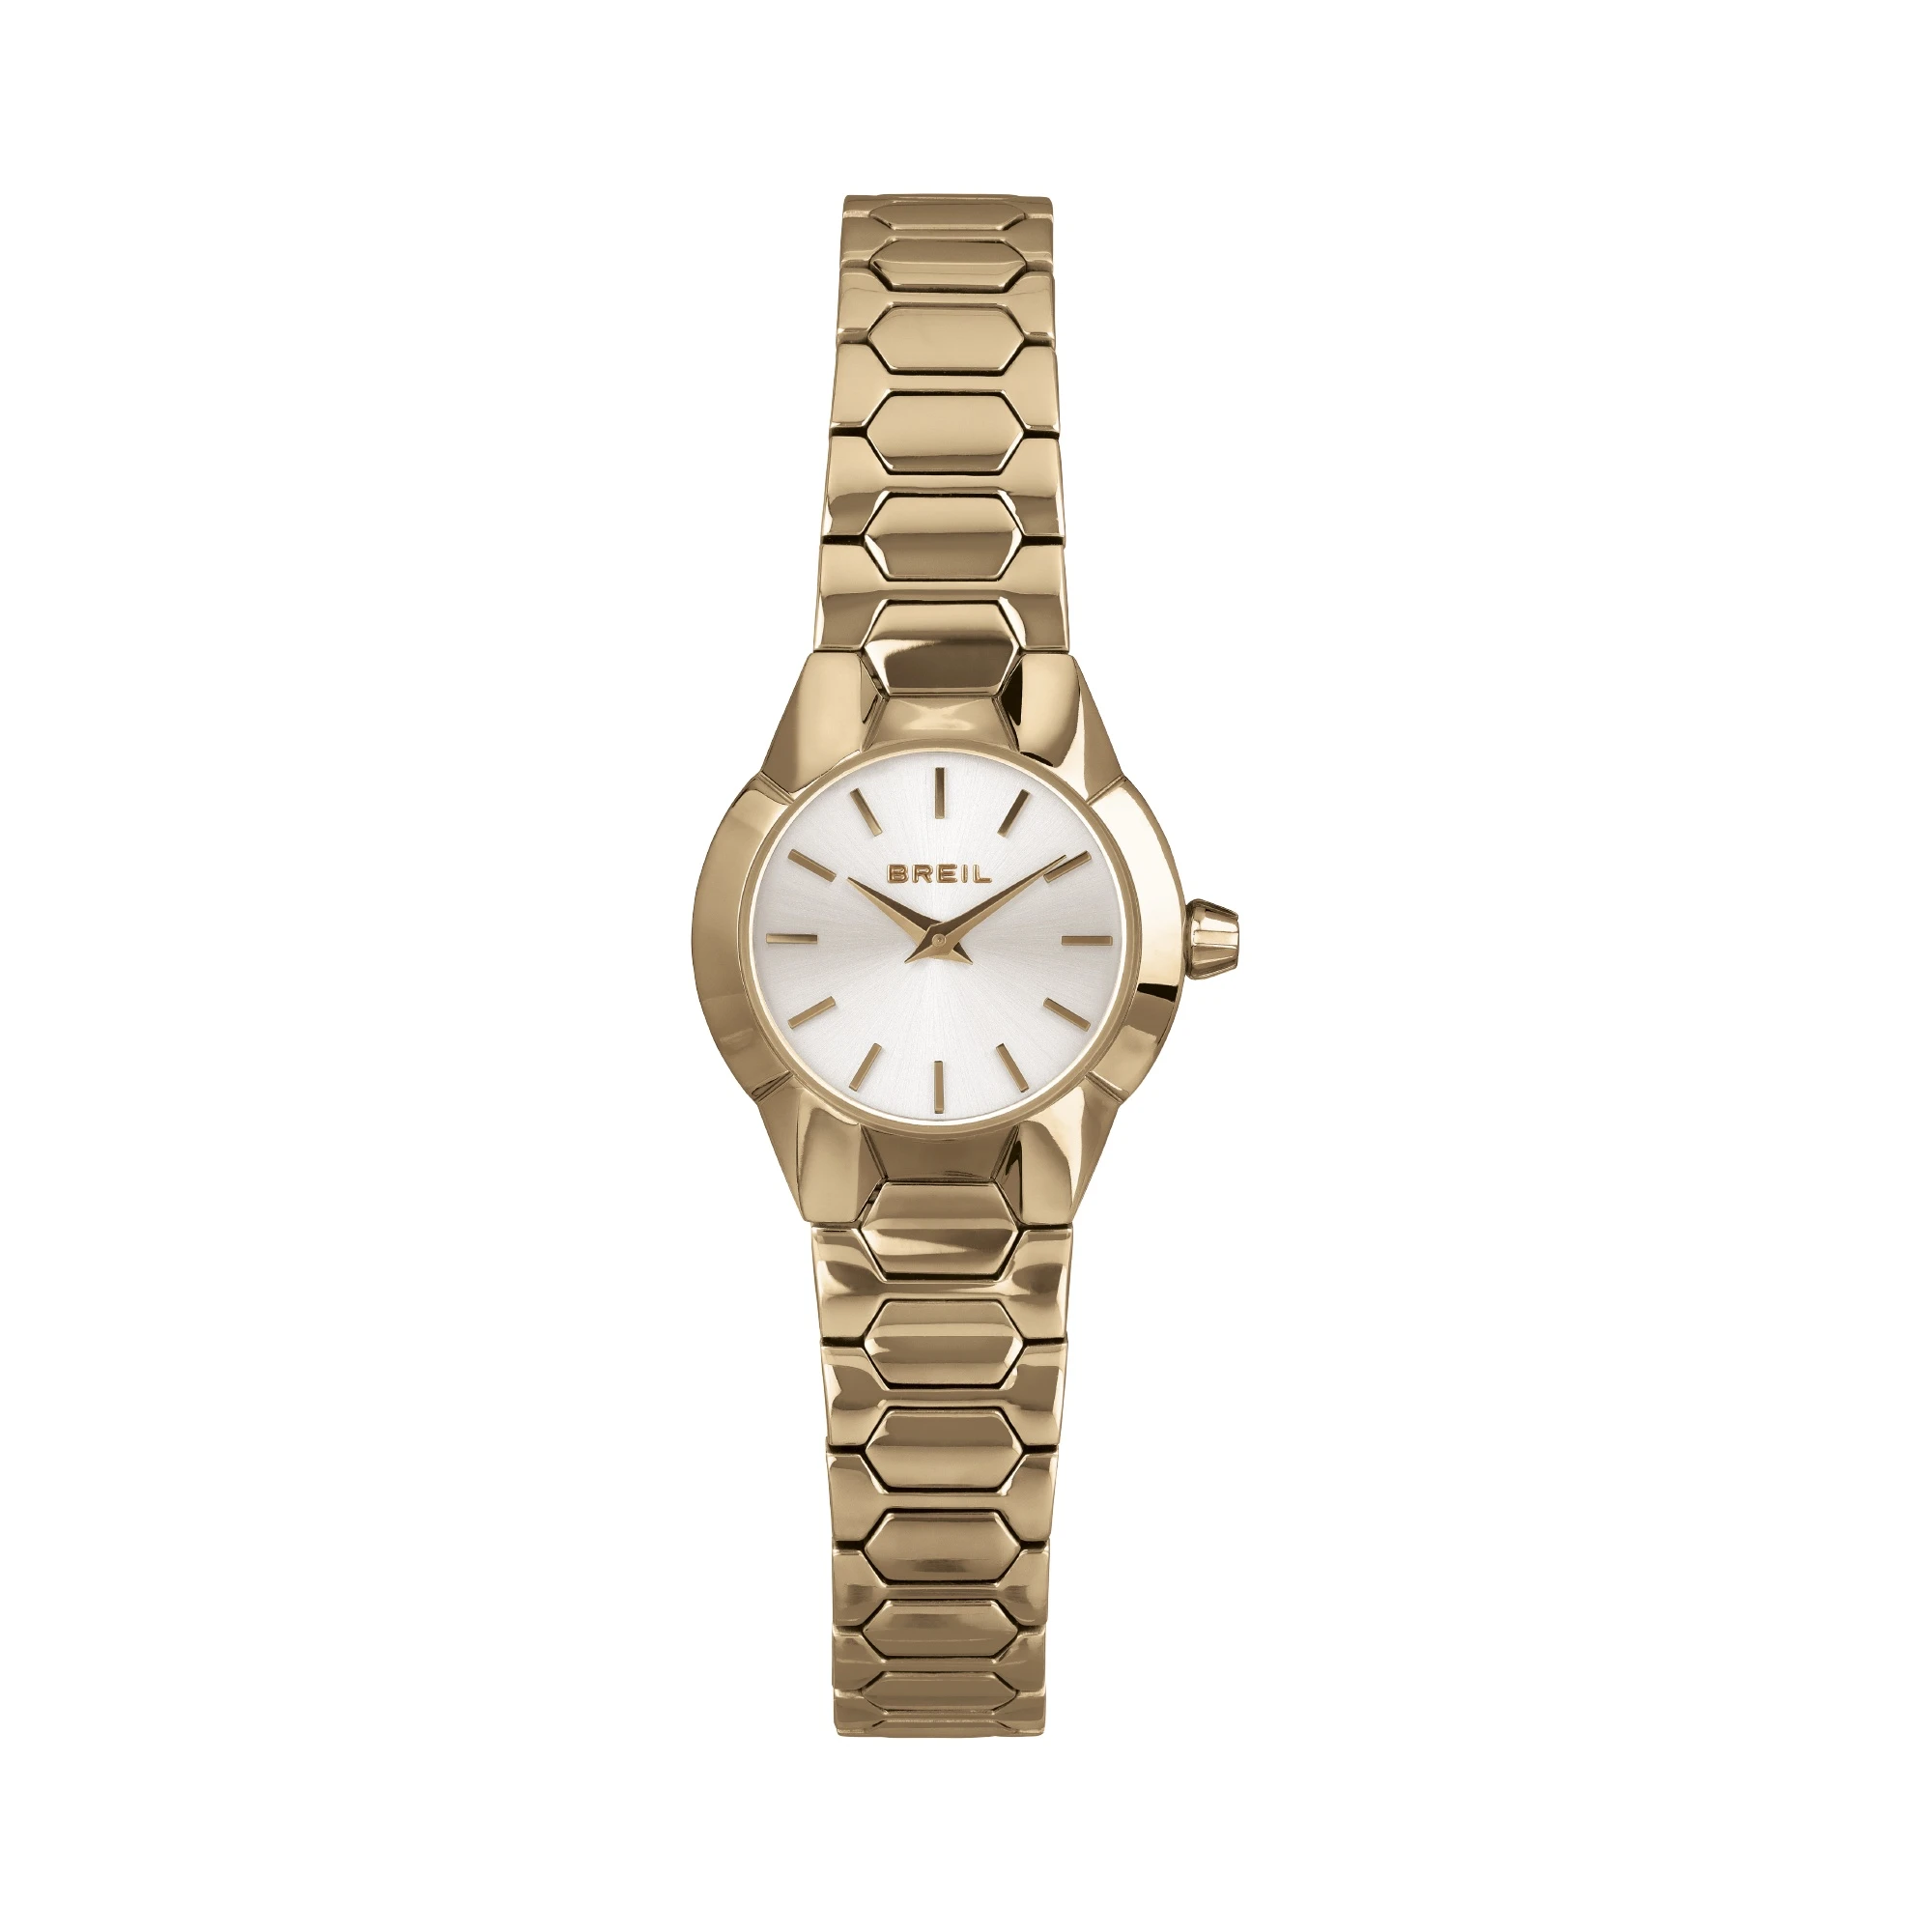 NEW ONE - SOLO TEMPO LADY 24 MM - 1 - TW1859 | Breil